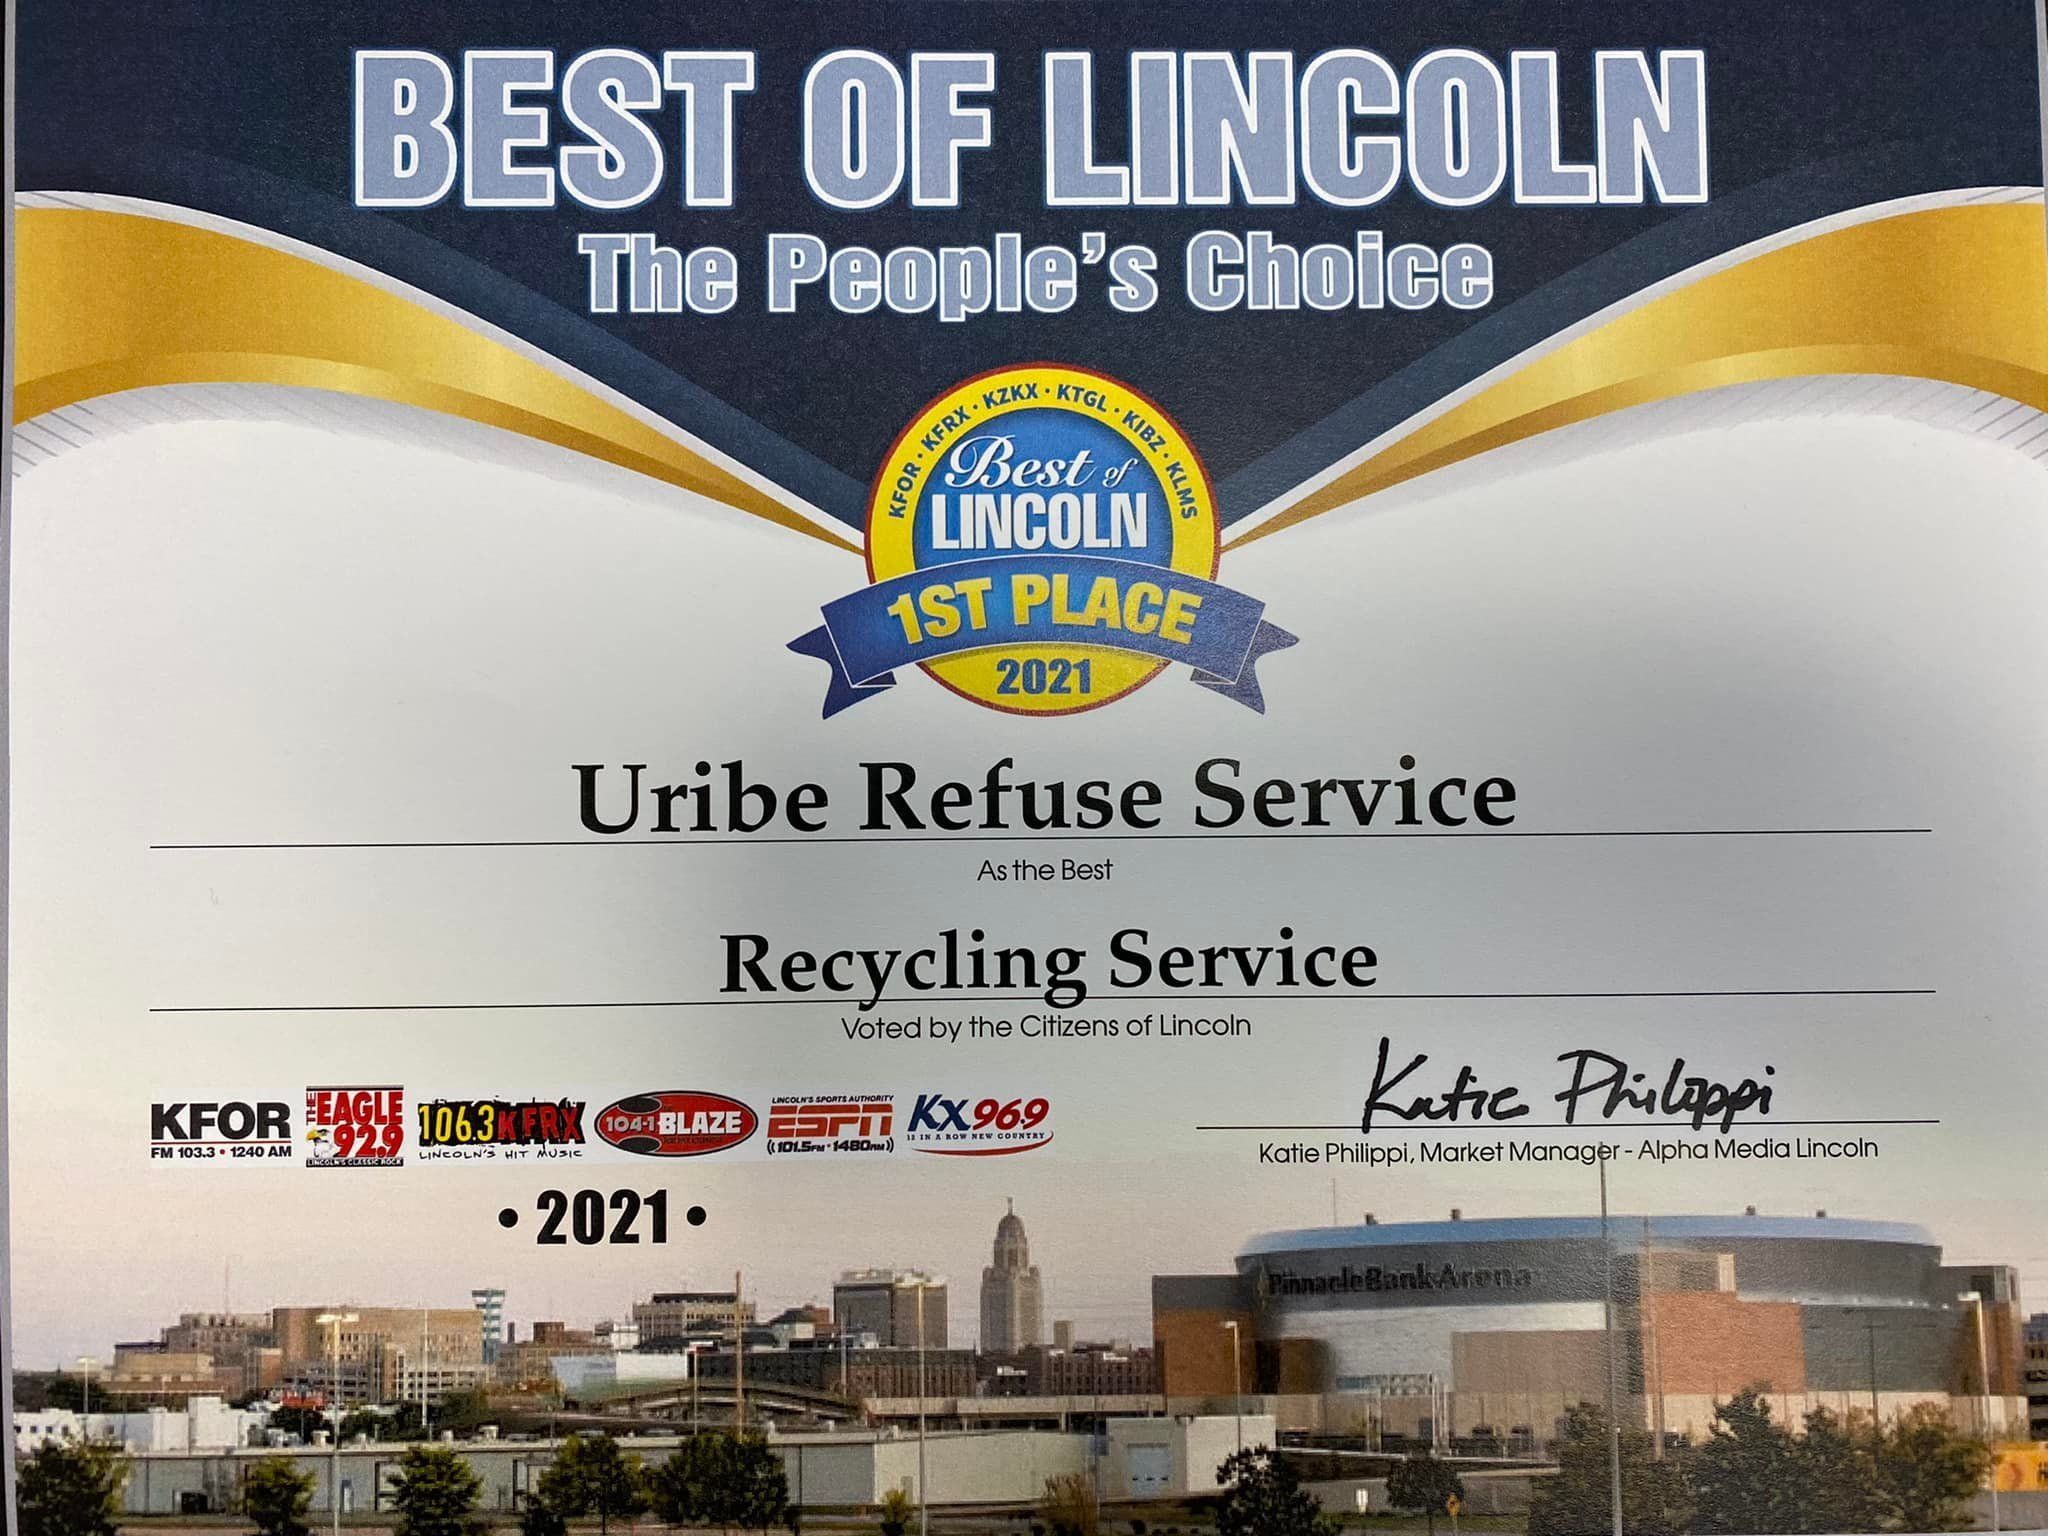 Best of Lincoln 1st Place Award